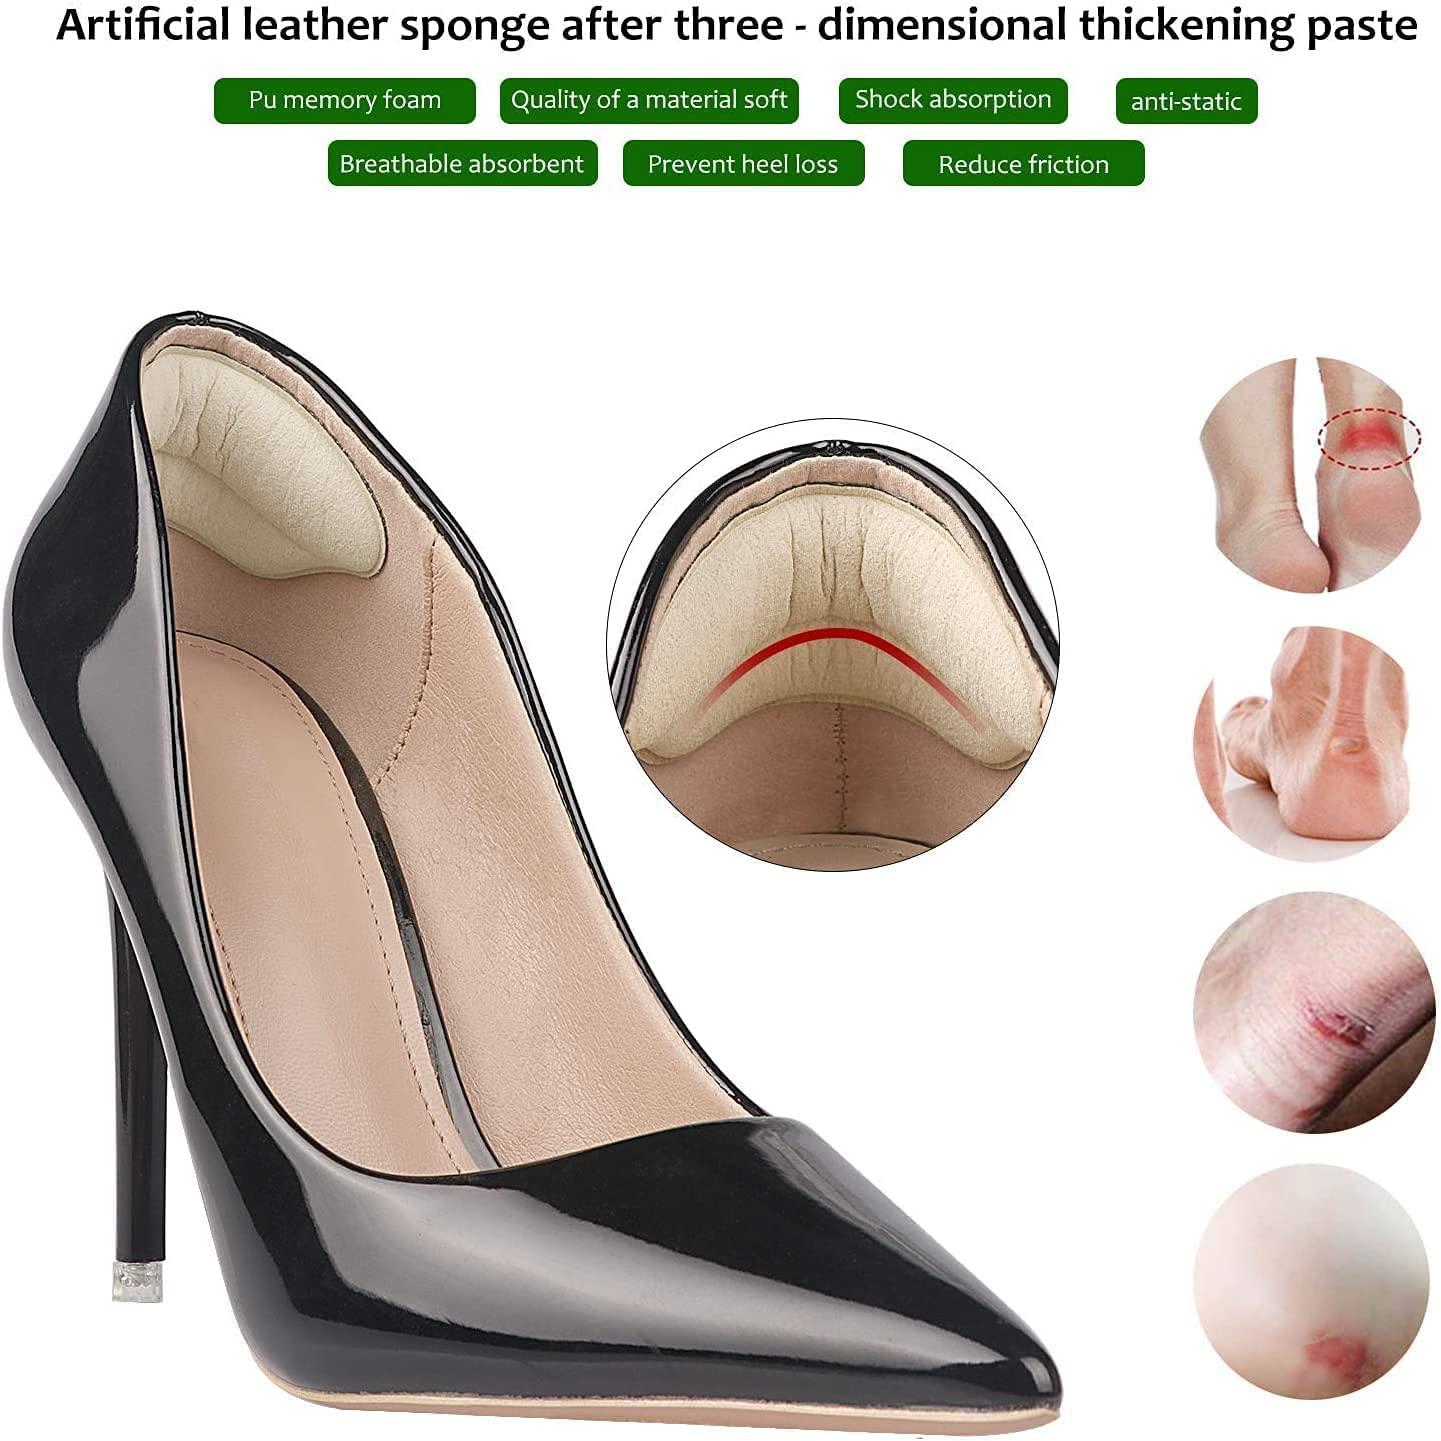 Spptty Shoe Gel Inserts,Heel Pads Grips Liners Back Heel Cushion Insoles  for High Heels Blisters,hh Heel Pads Grips Liners Back Heel Cushion Insoles  for High Heels Blisters,Shoe Gel Inserts - Walmart.ca